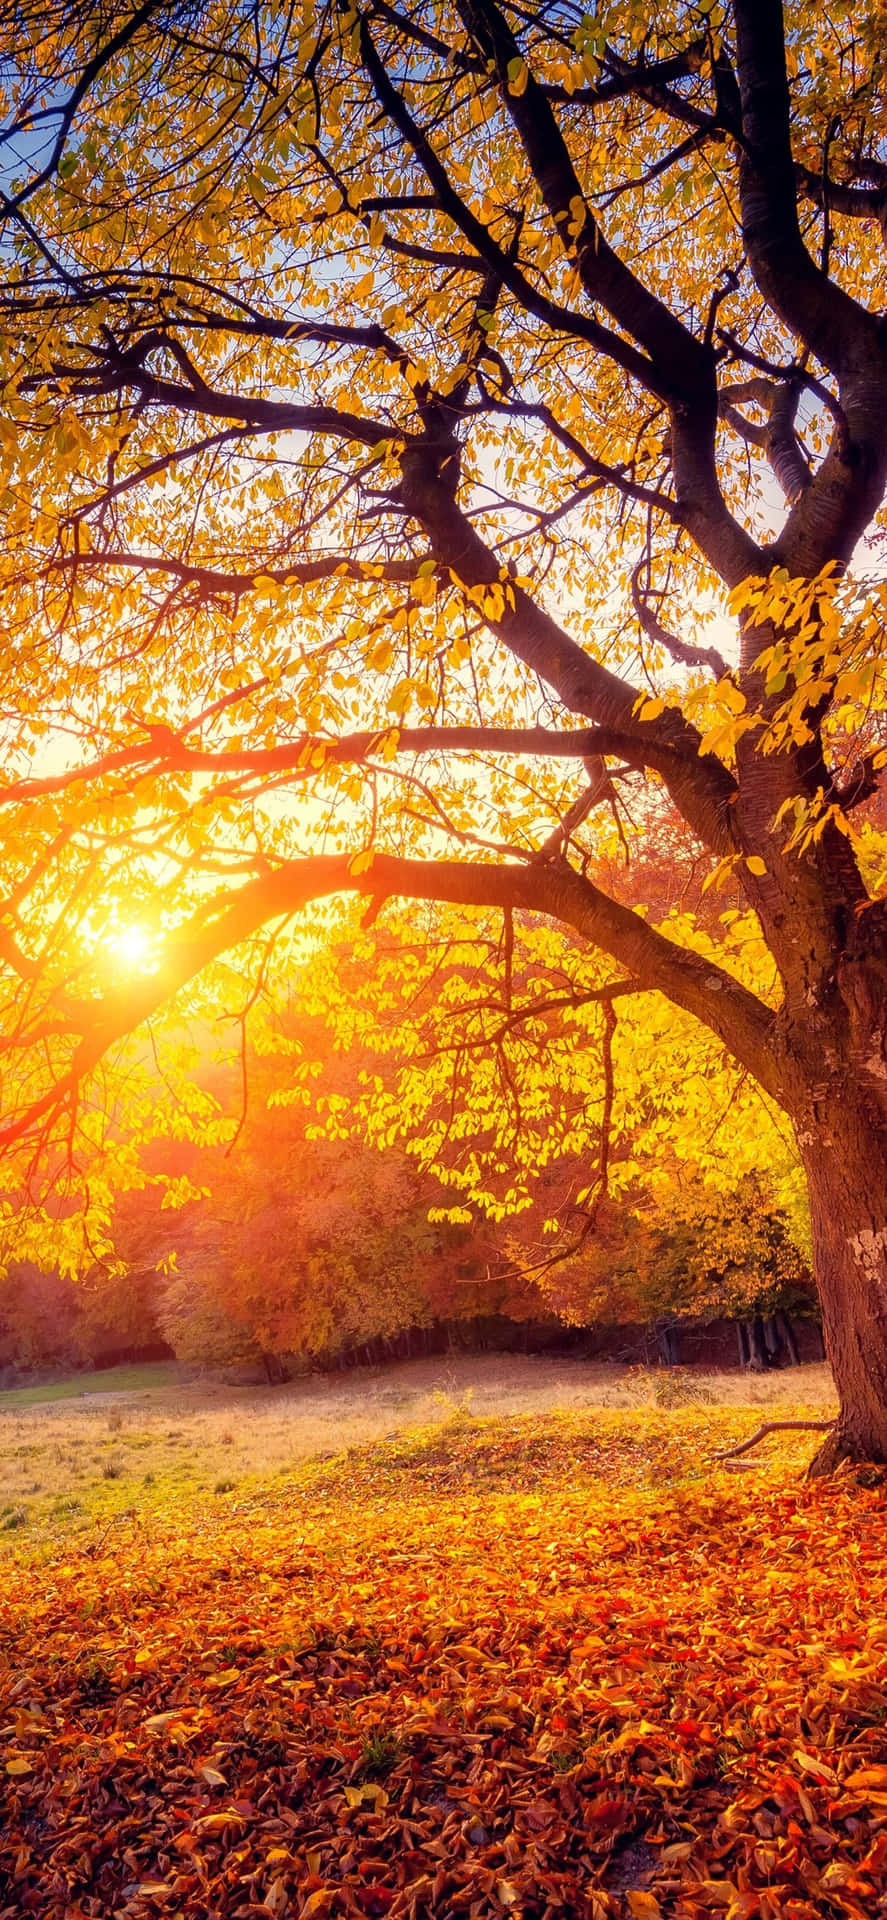 Glowing Sun And Cute Autumn Iphone Wallpaper